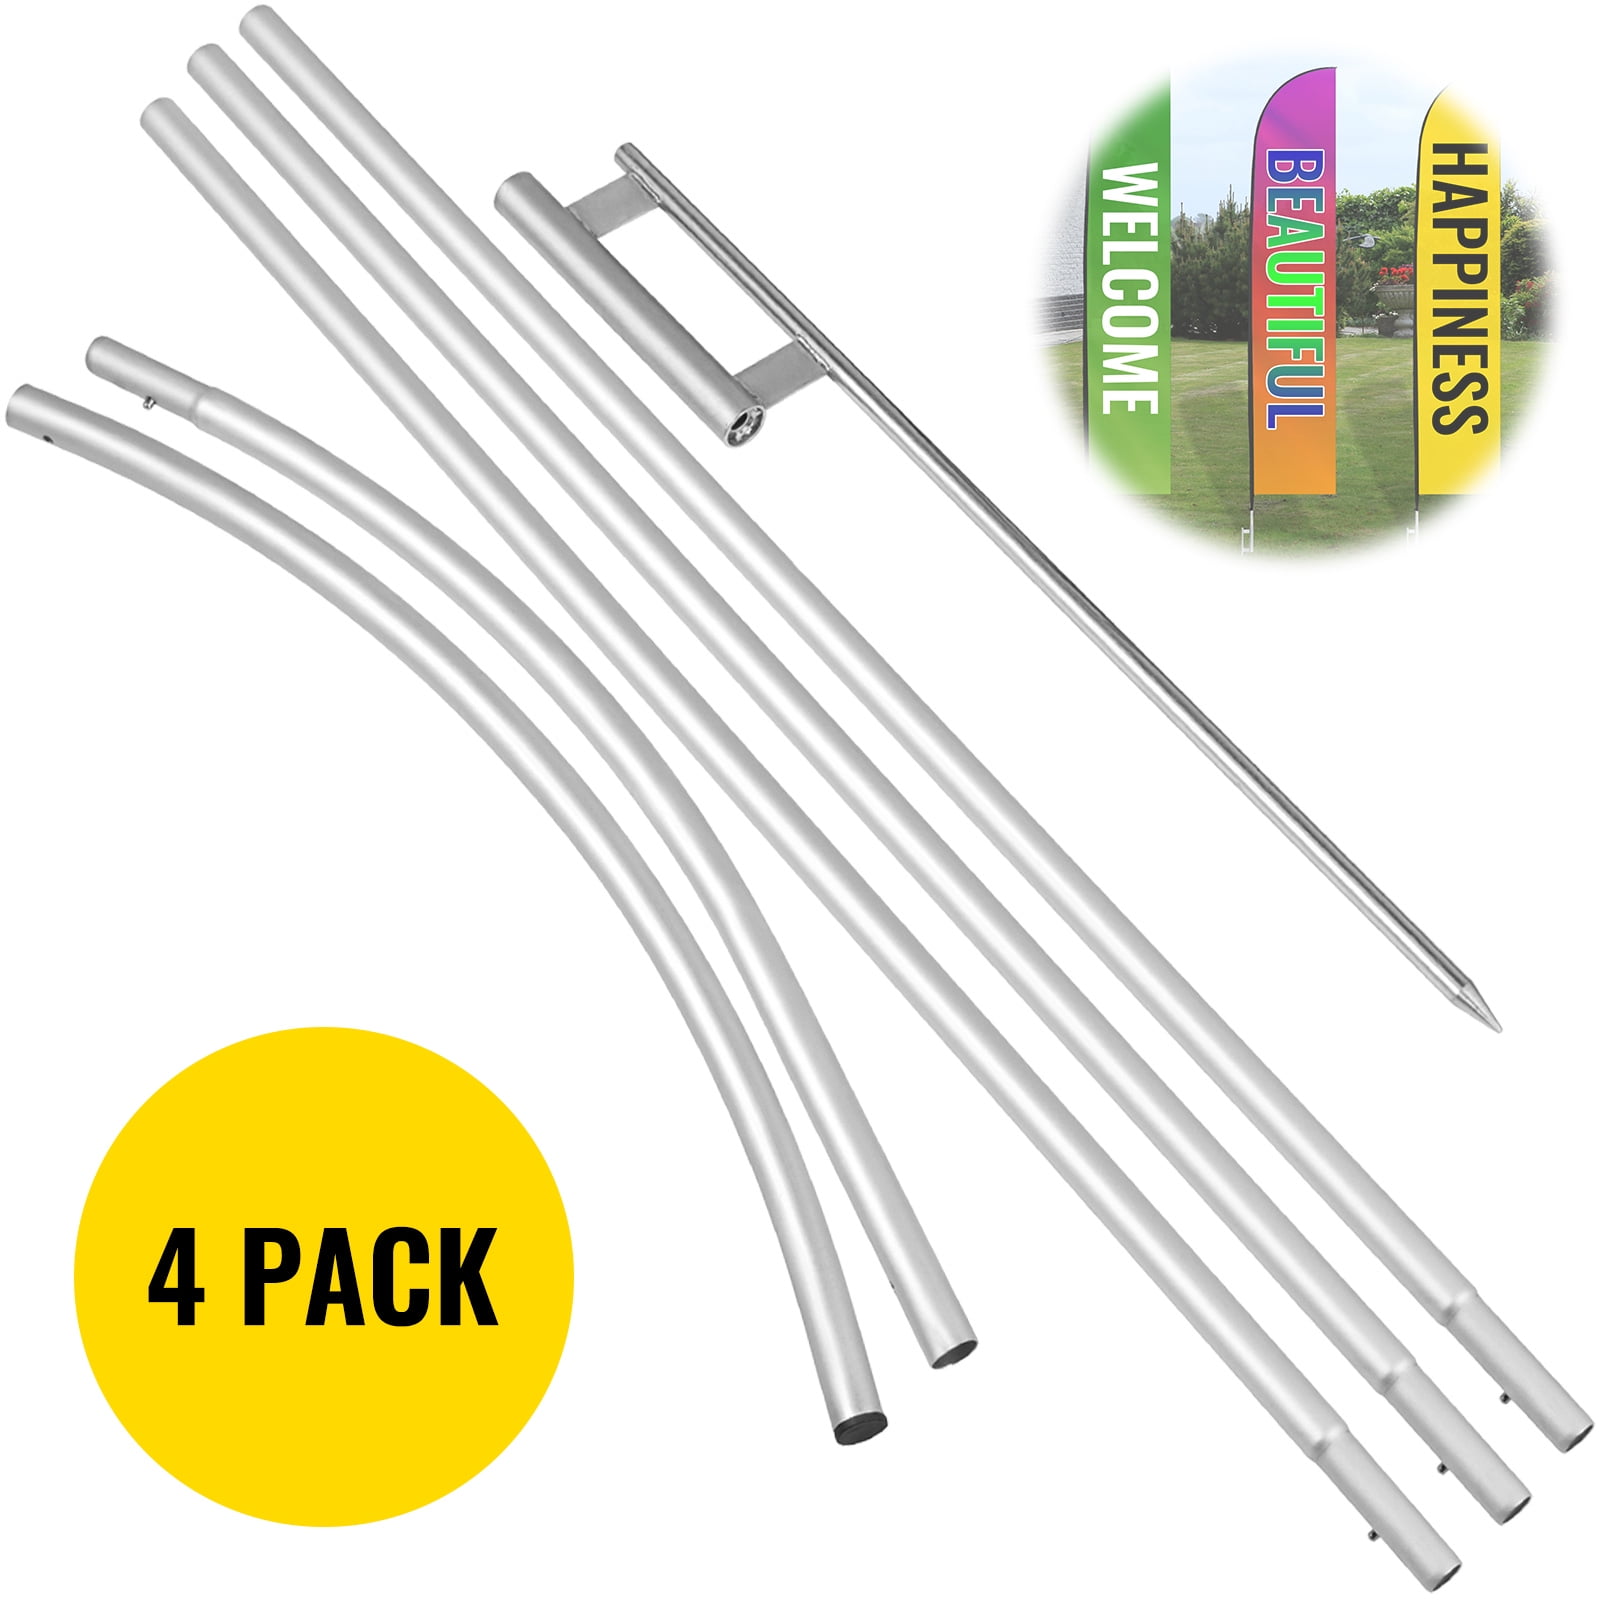 VEVOR Advertising Flag Pole, 3 x Feather Flag Bundles, 16ft Windless Flag Pole Sets with Ground Mounting Stake, 6pcs Swooper Flag Pole Kit, Feather